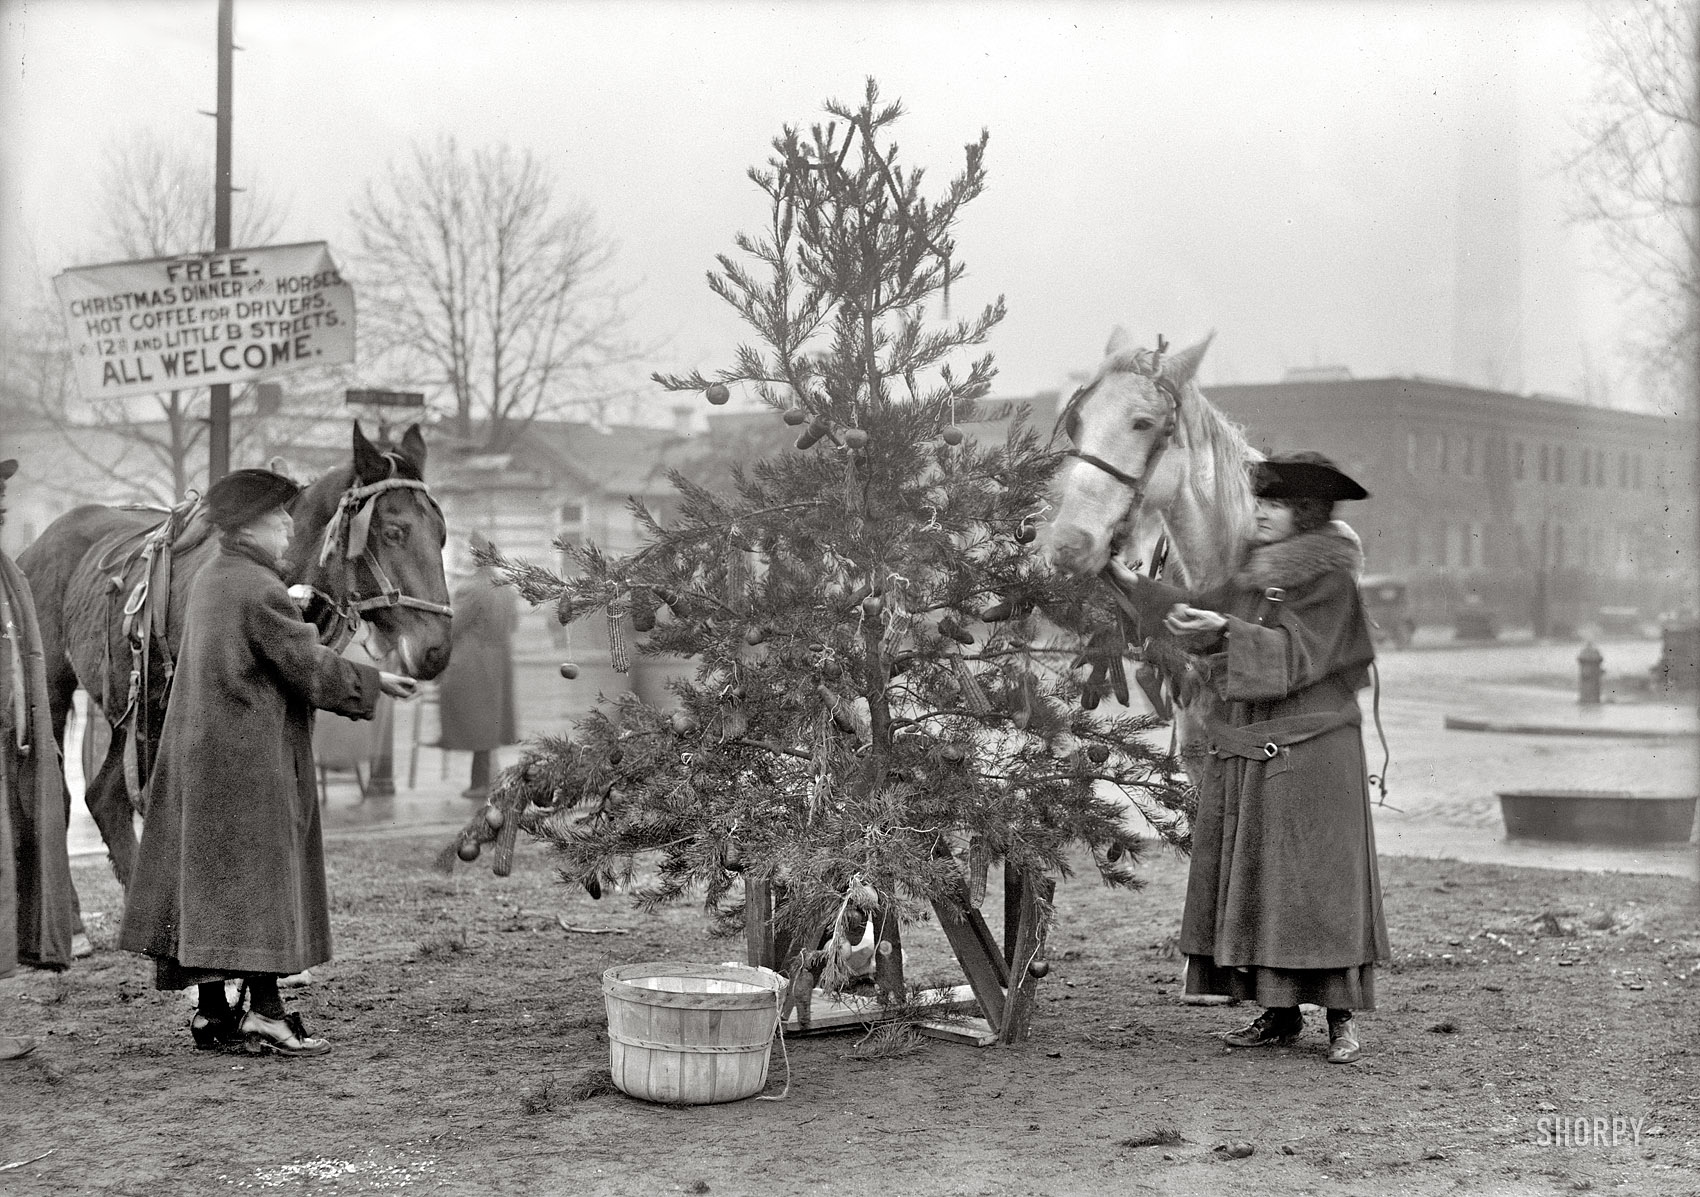 December 1918 in Washington, D.C. "Christmas dinner for horses." That tree looks mighty tasty! Harris & Ewing Collection glass negative. View full size.